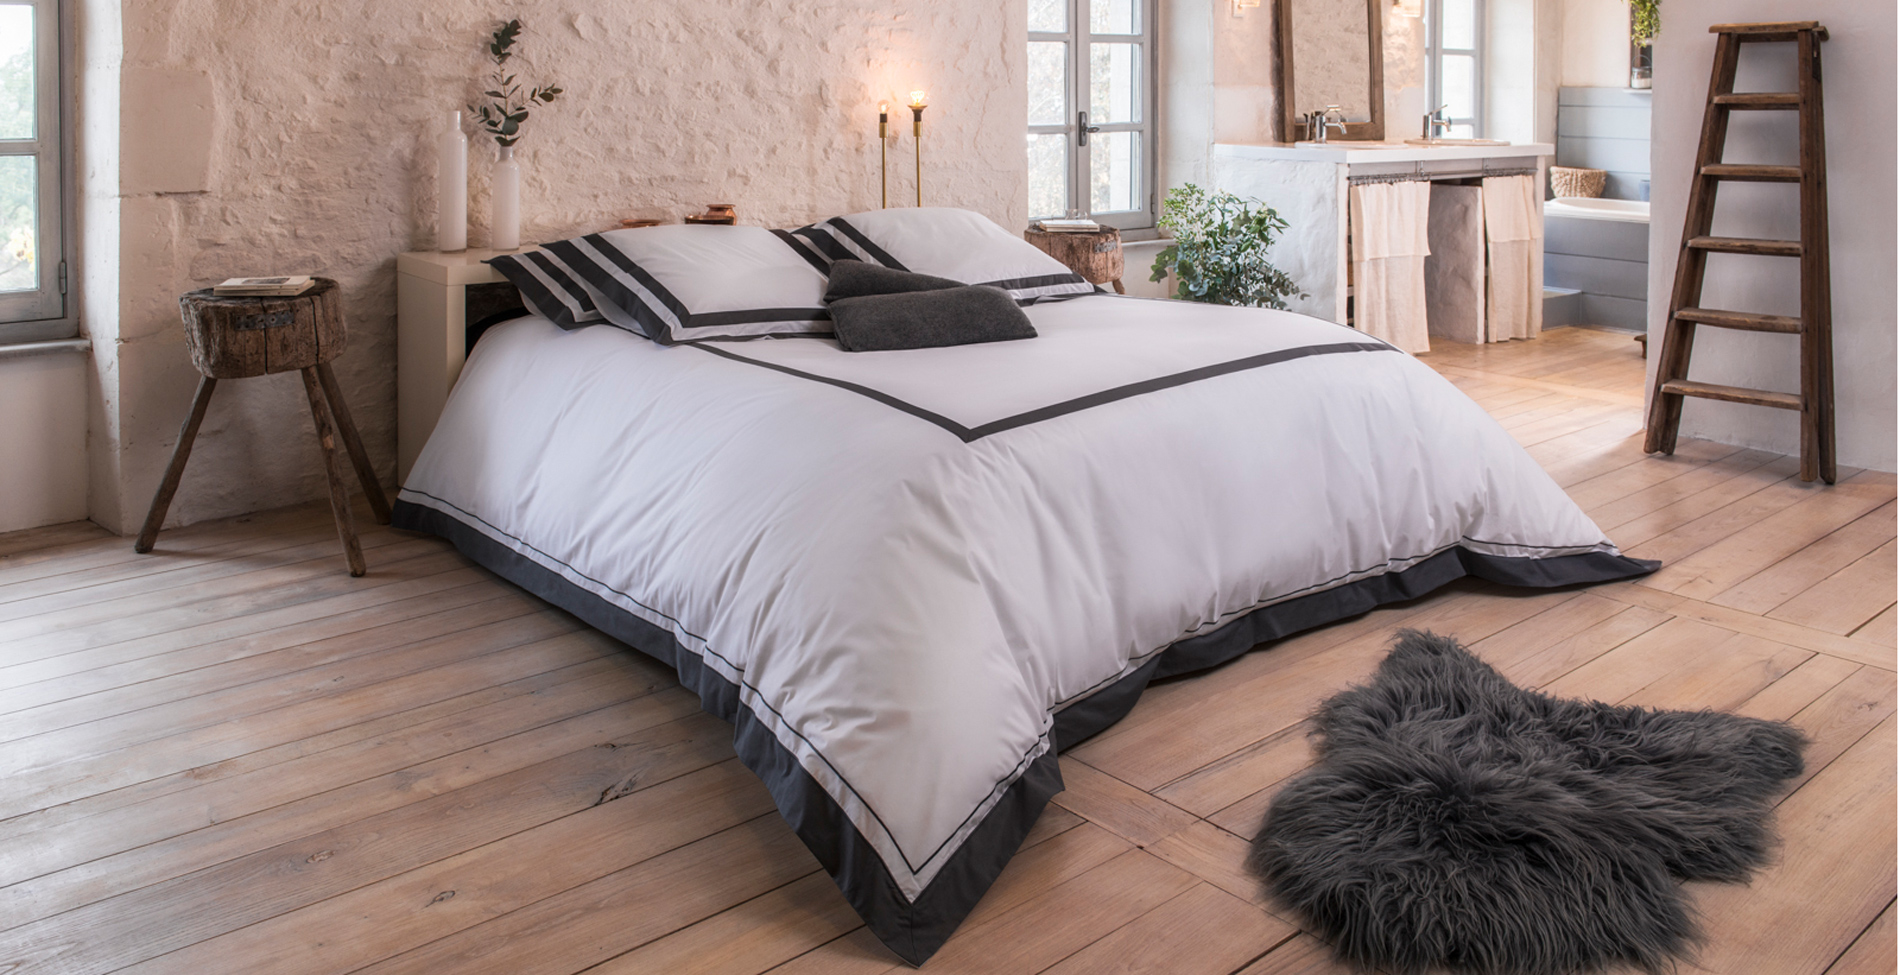 Bed Linen from Aigredoux France